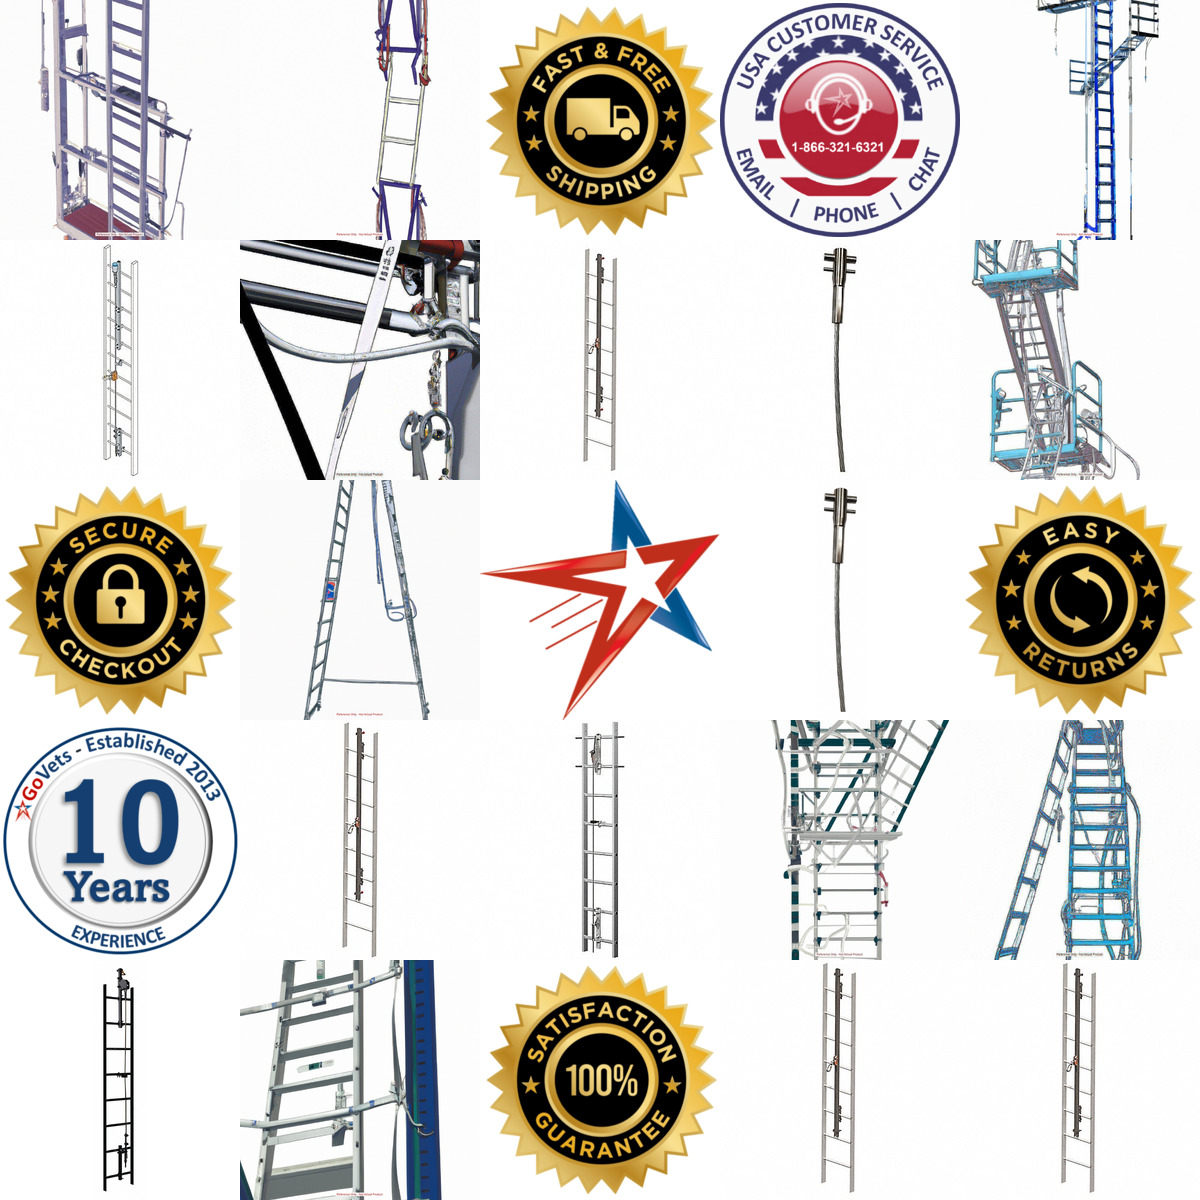 A selection of Ladder Lifeline Systems products on GoVets